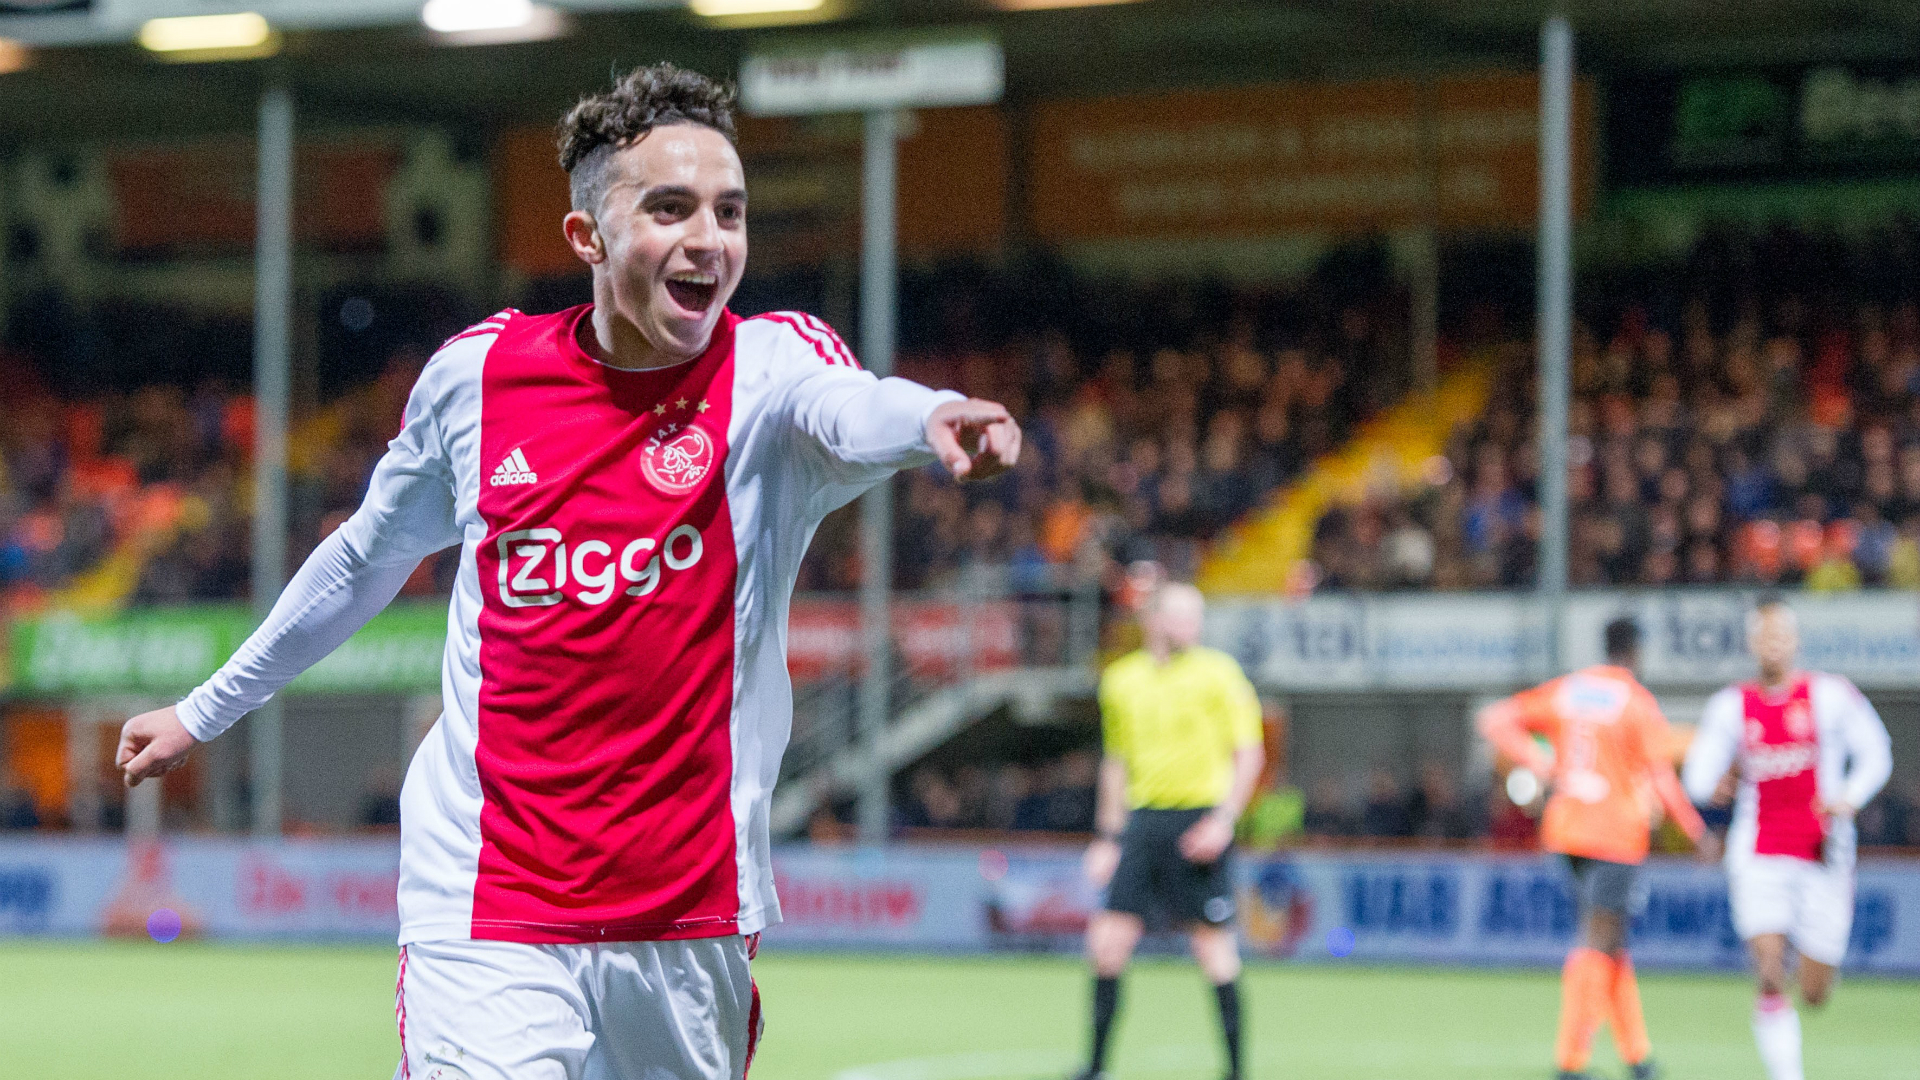 Players, Fans From Across the World Praying for the Recovery of Young Ajax Star Abdelhak Nouri